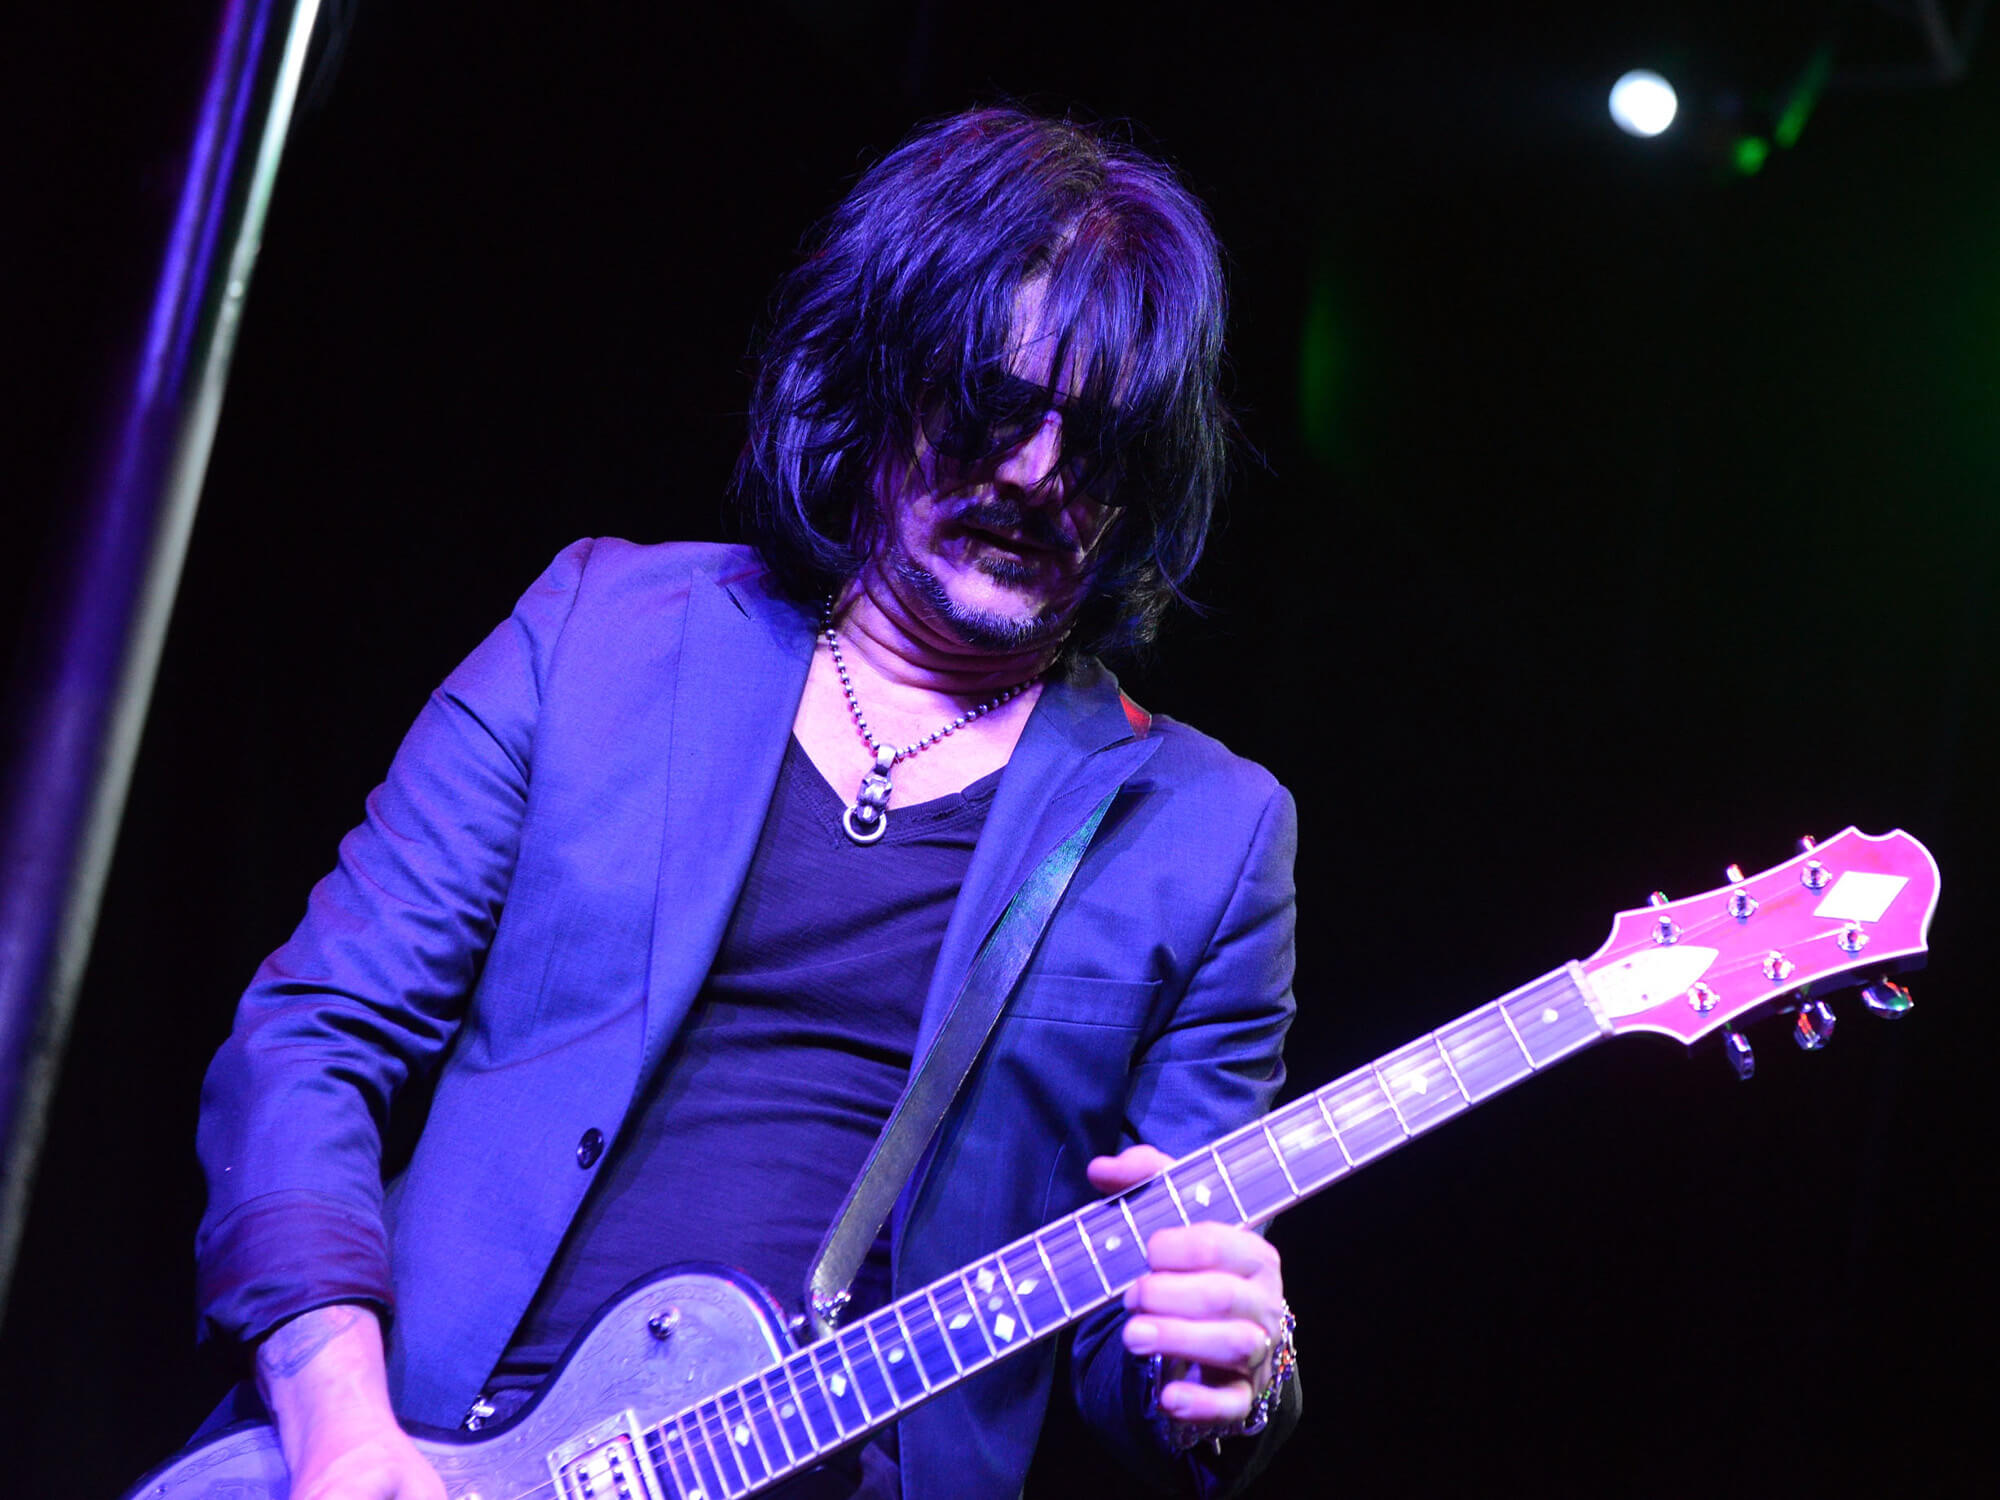 Gilby Clarke on stage playing guitar